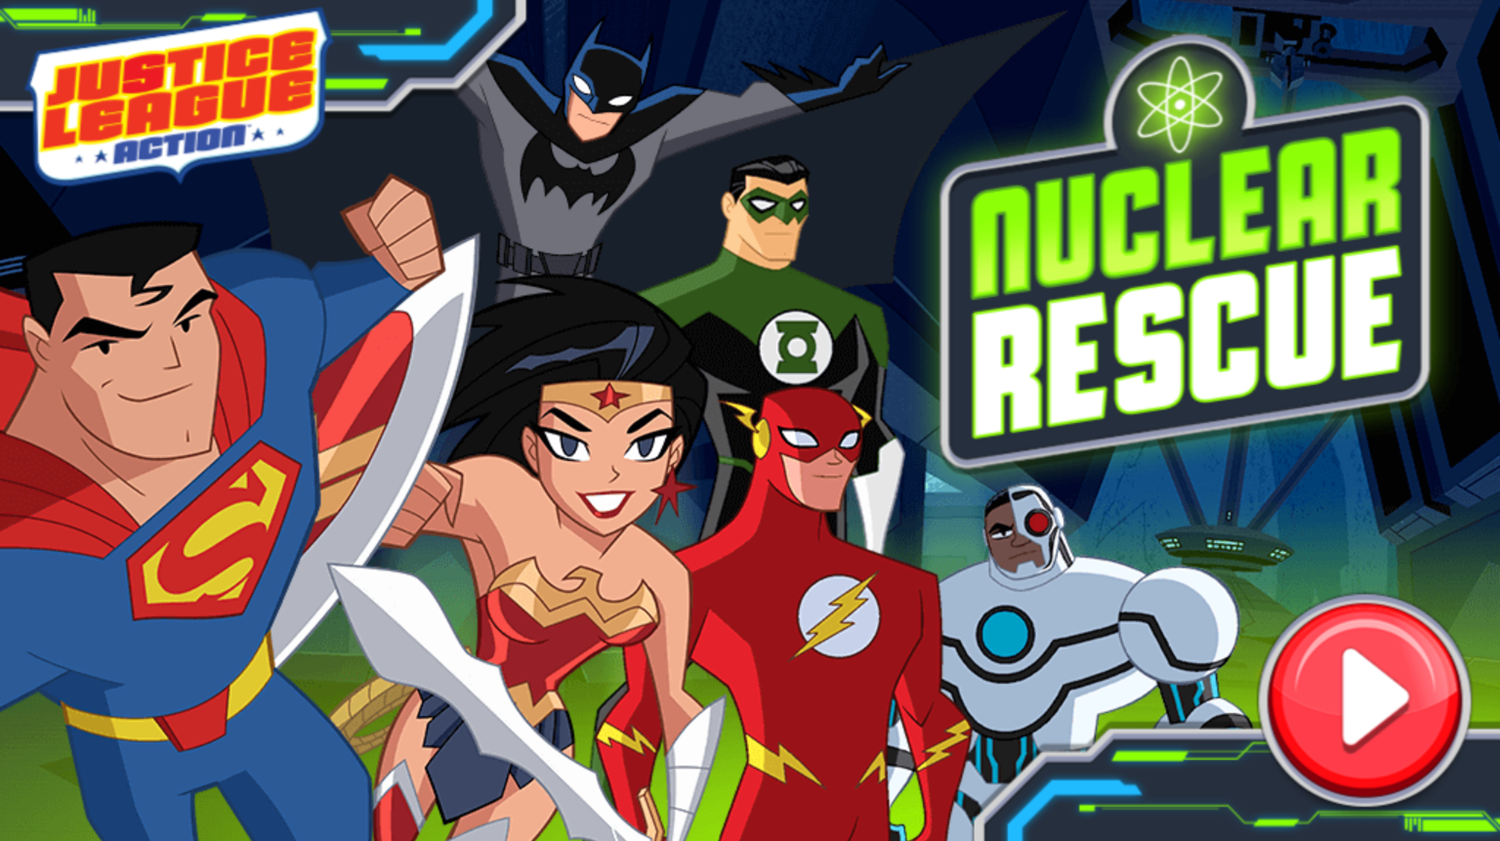 Justice League Action Nuclear Rescue Game Welcome Screen Screenshot.